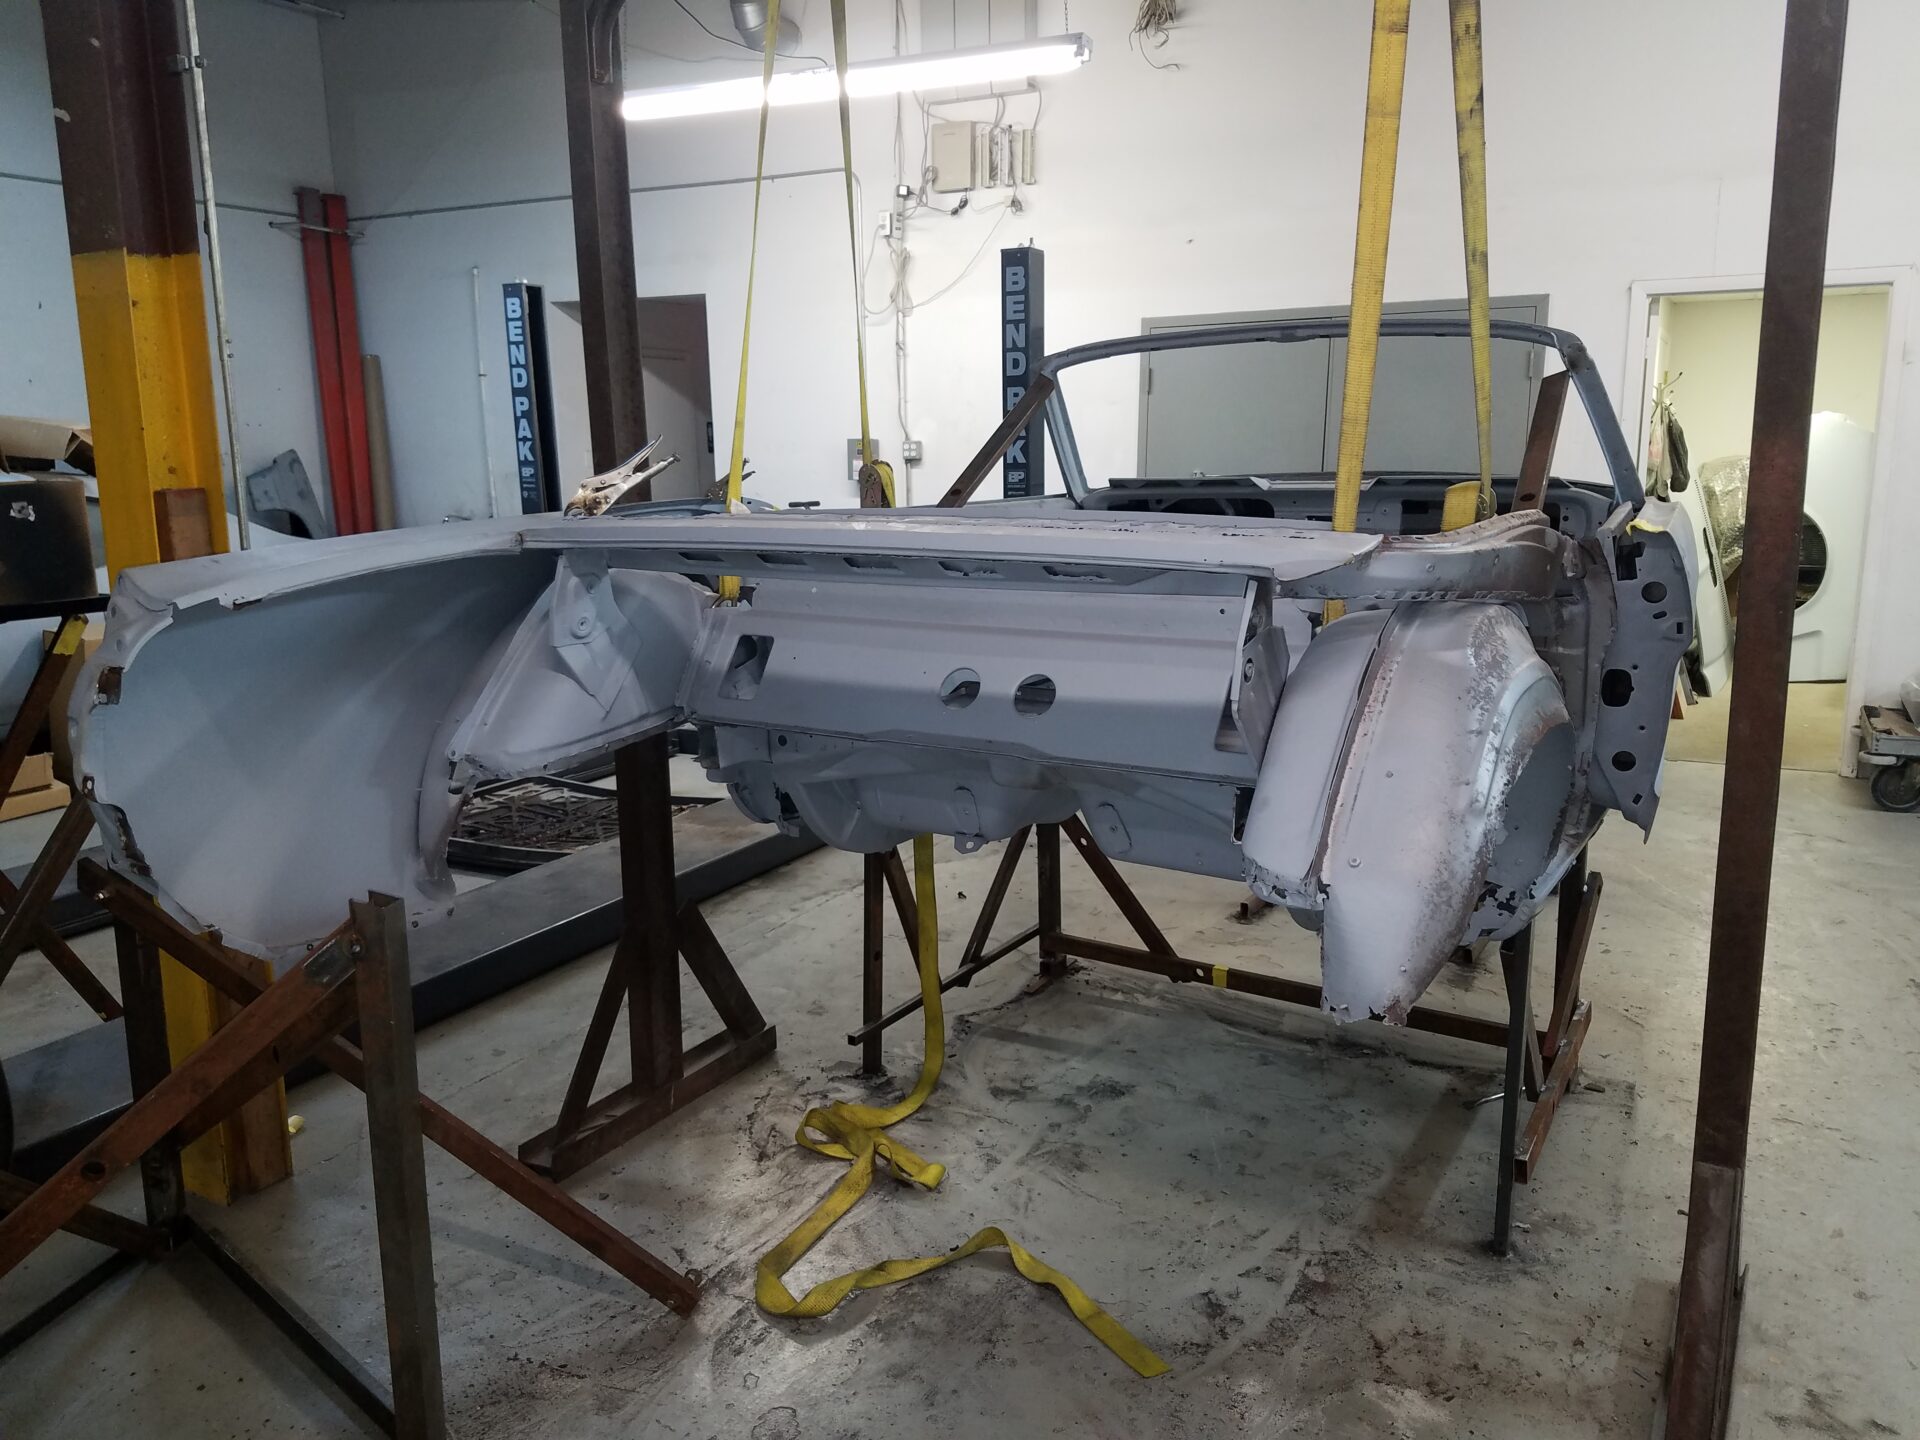 Disassembling the back portion of the 1966 Ford Mustang Convertible